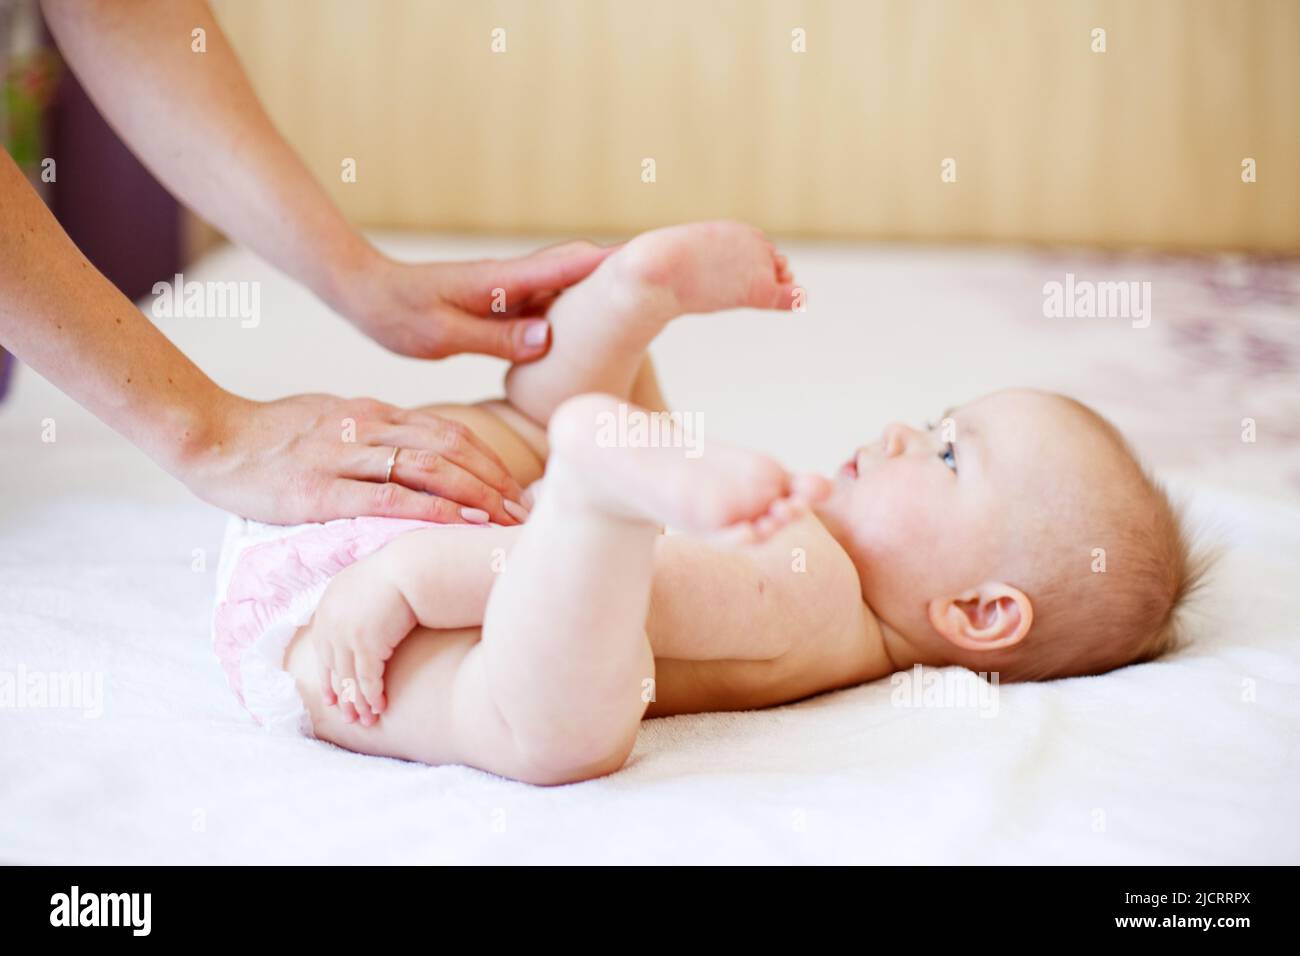 Caring young mother changing the diaper of her baby at home Stock Photo